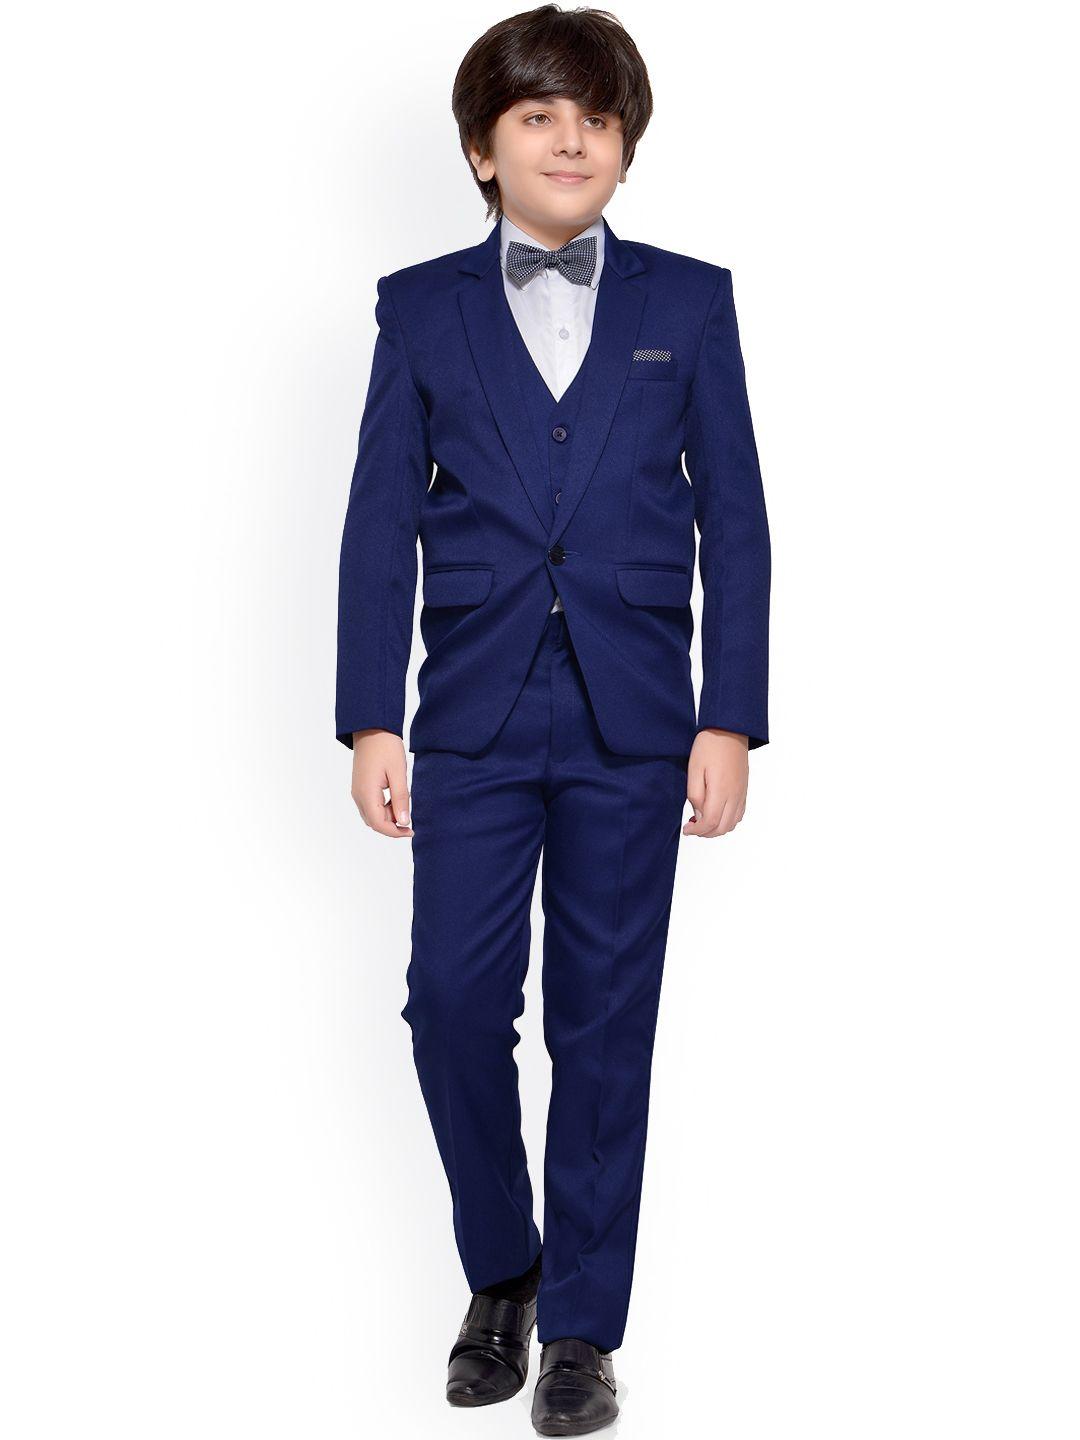 jeetethnics boys navy blue solid 5-piece single-breasted partywear suit